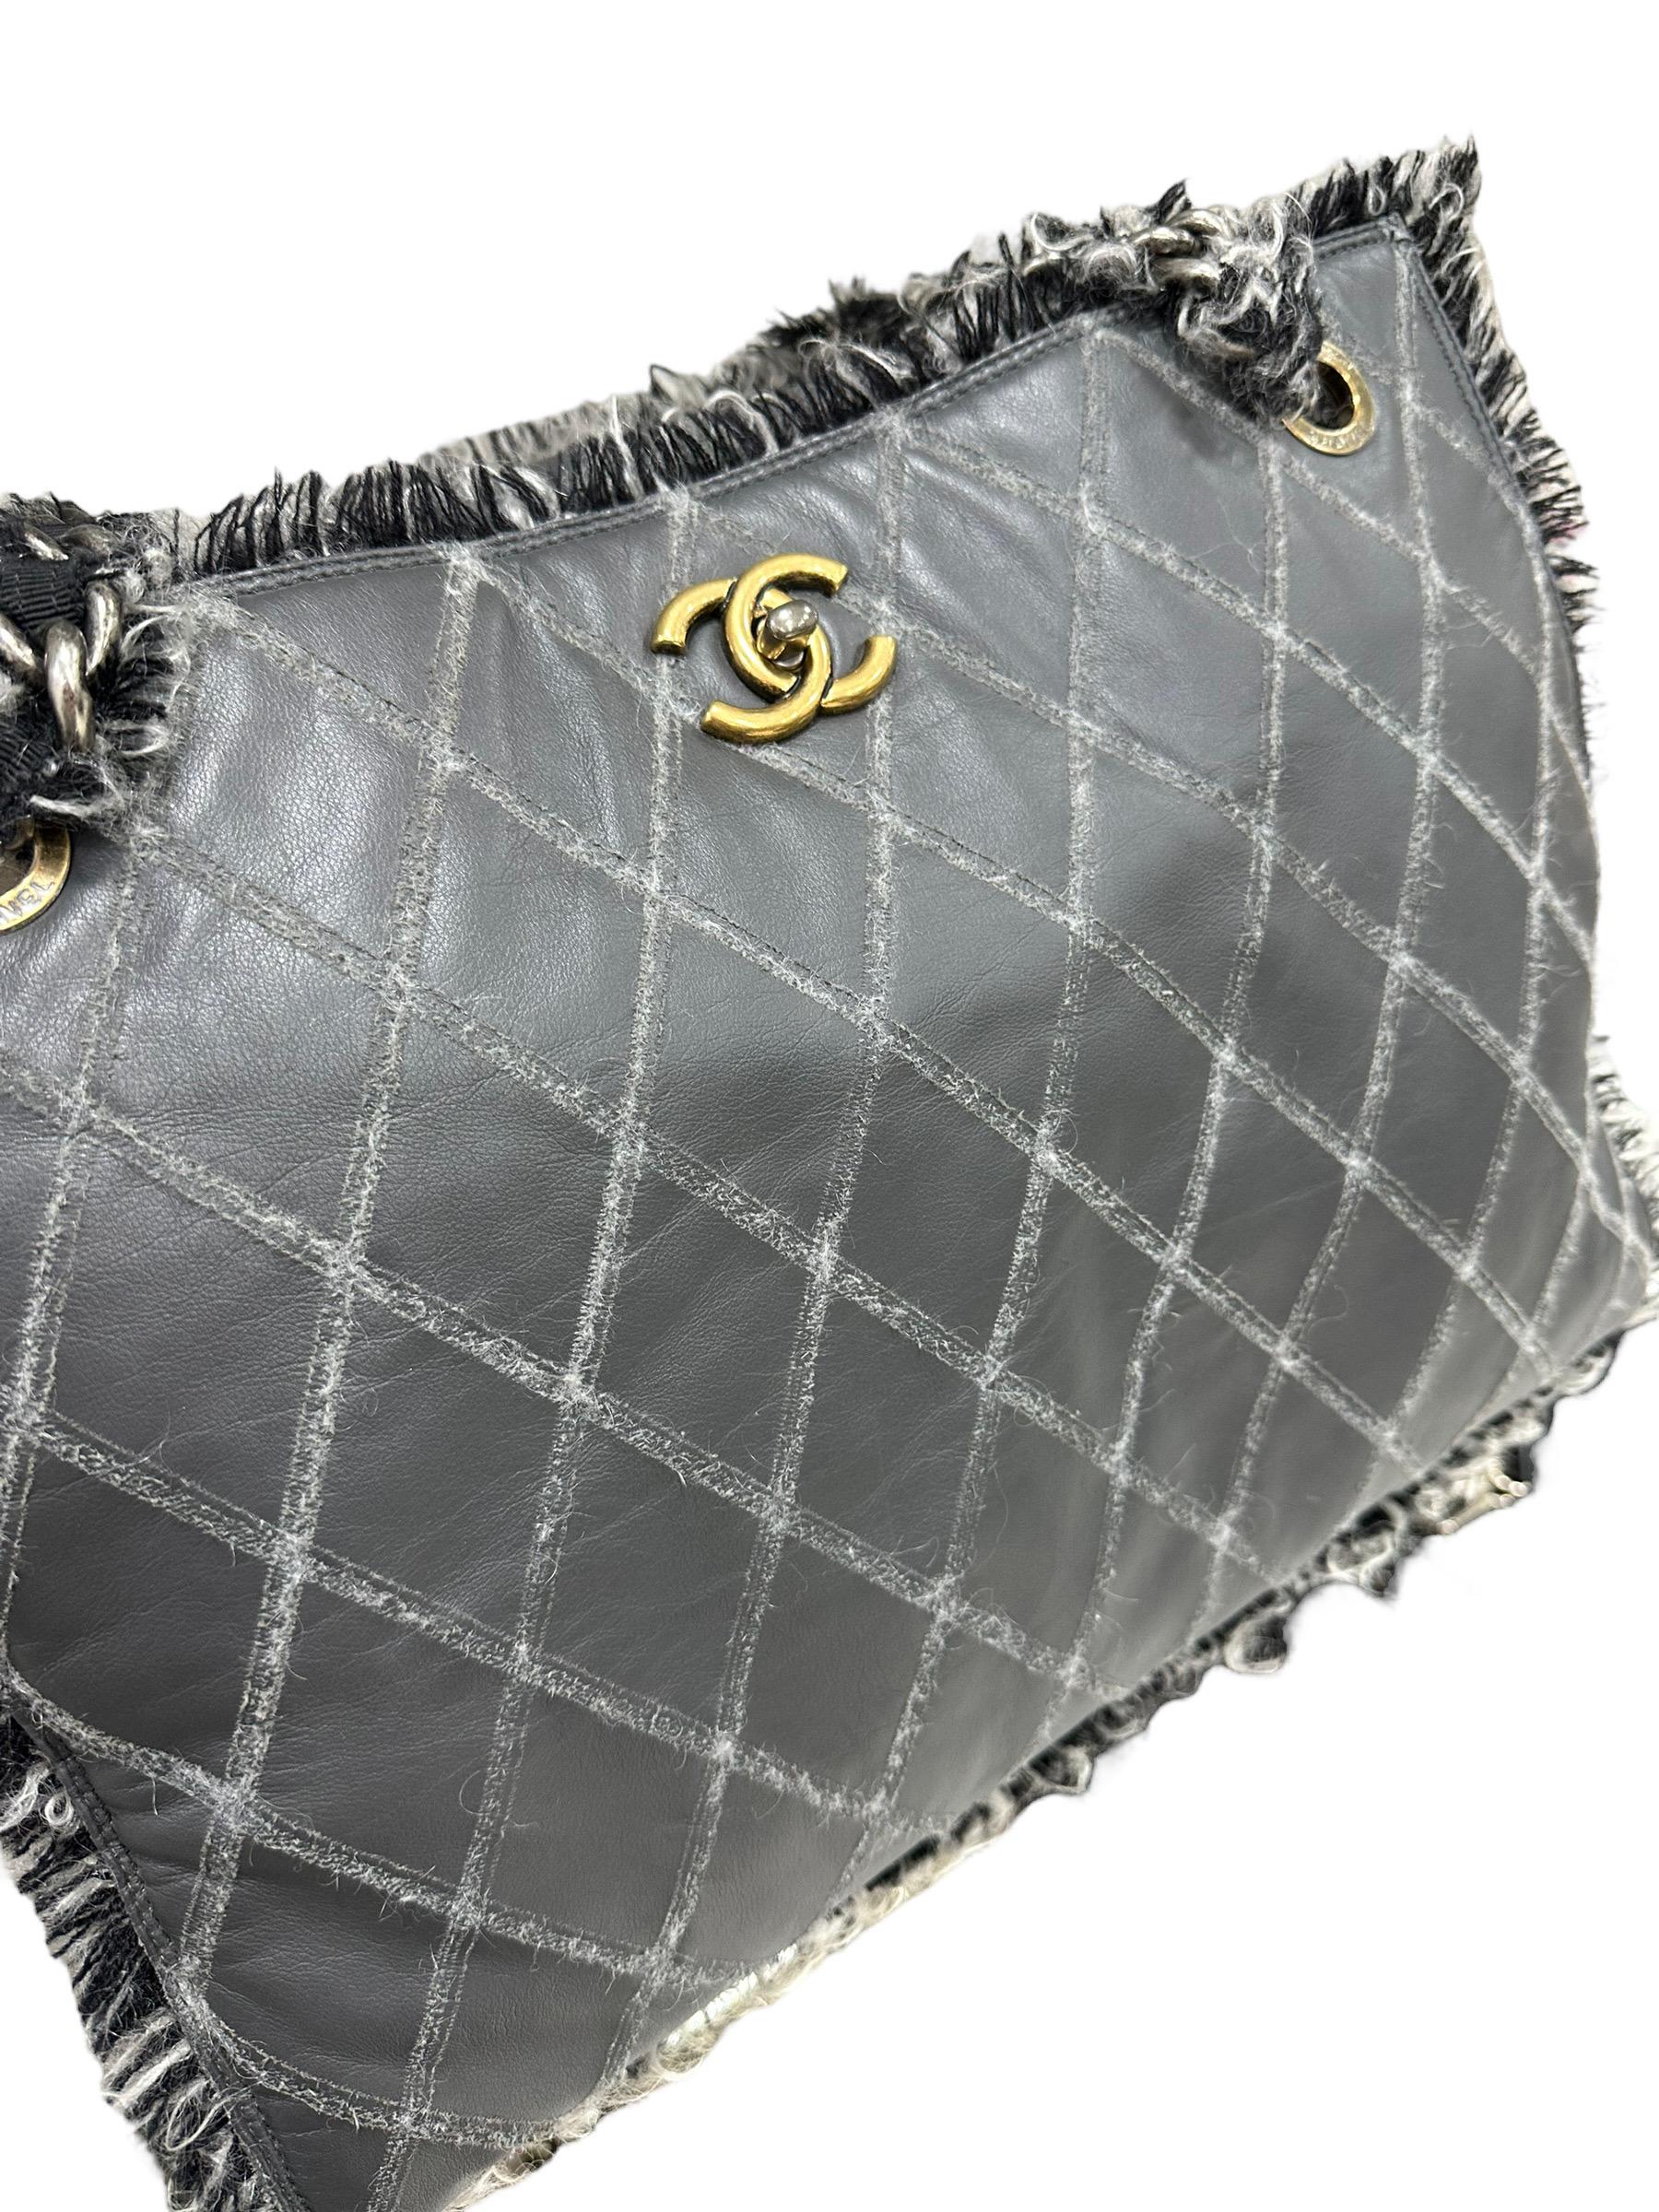 2011 Chanel Tweed Grey Tote Bag For Sale 10